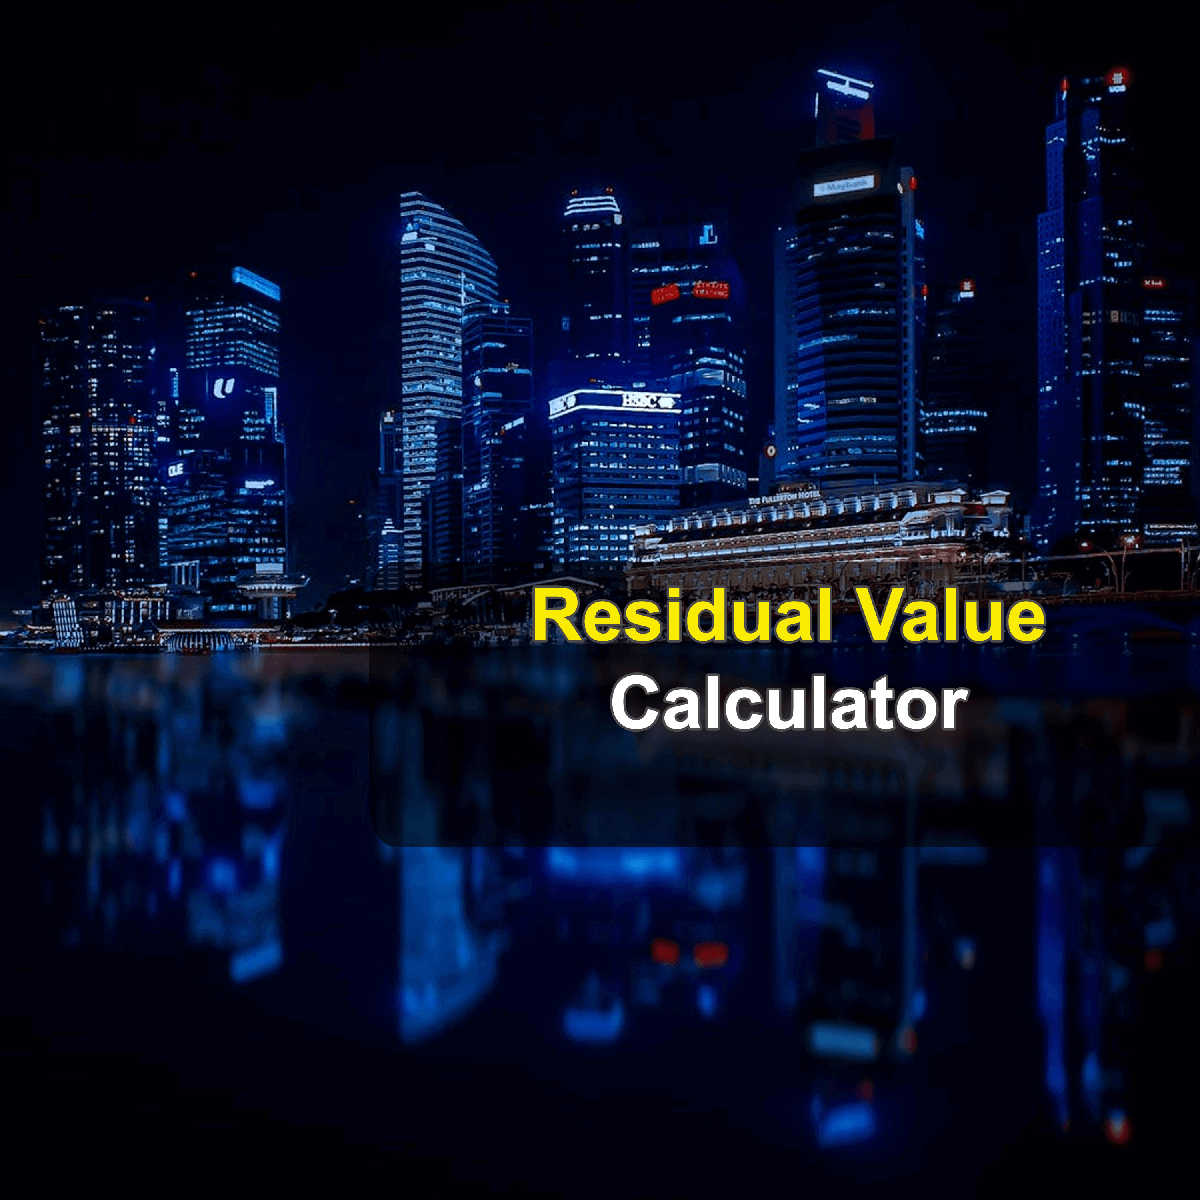 Residual Value Calculator. This image provides details of how to calculate the residual value of an asset. By using the residual value formula, the Residual Value Calculator provides a true calculation of your asset's value after it has served its useful life.